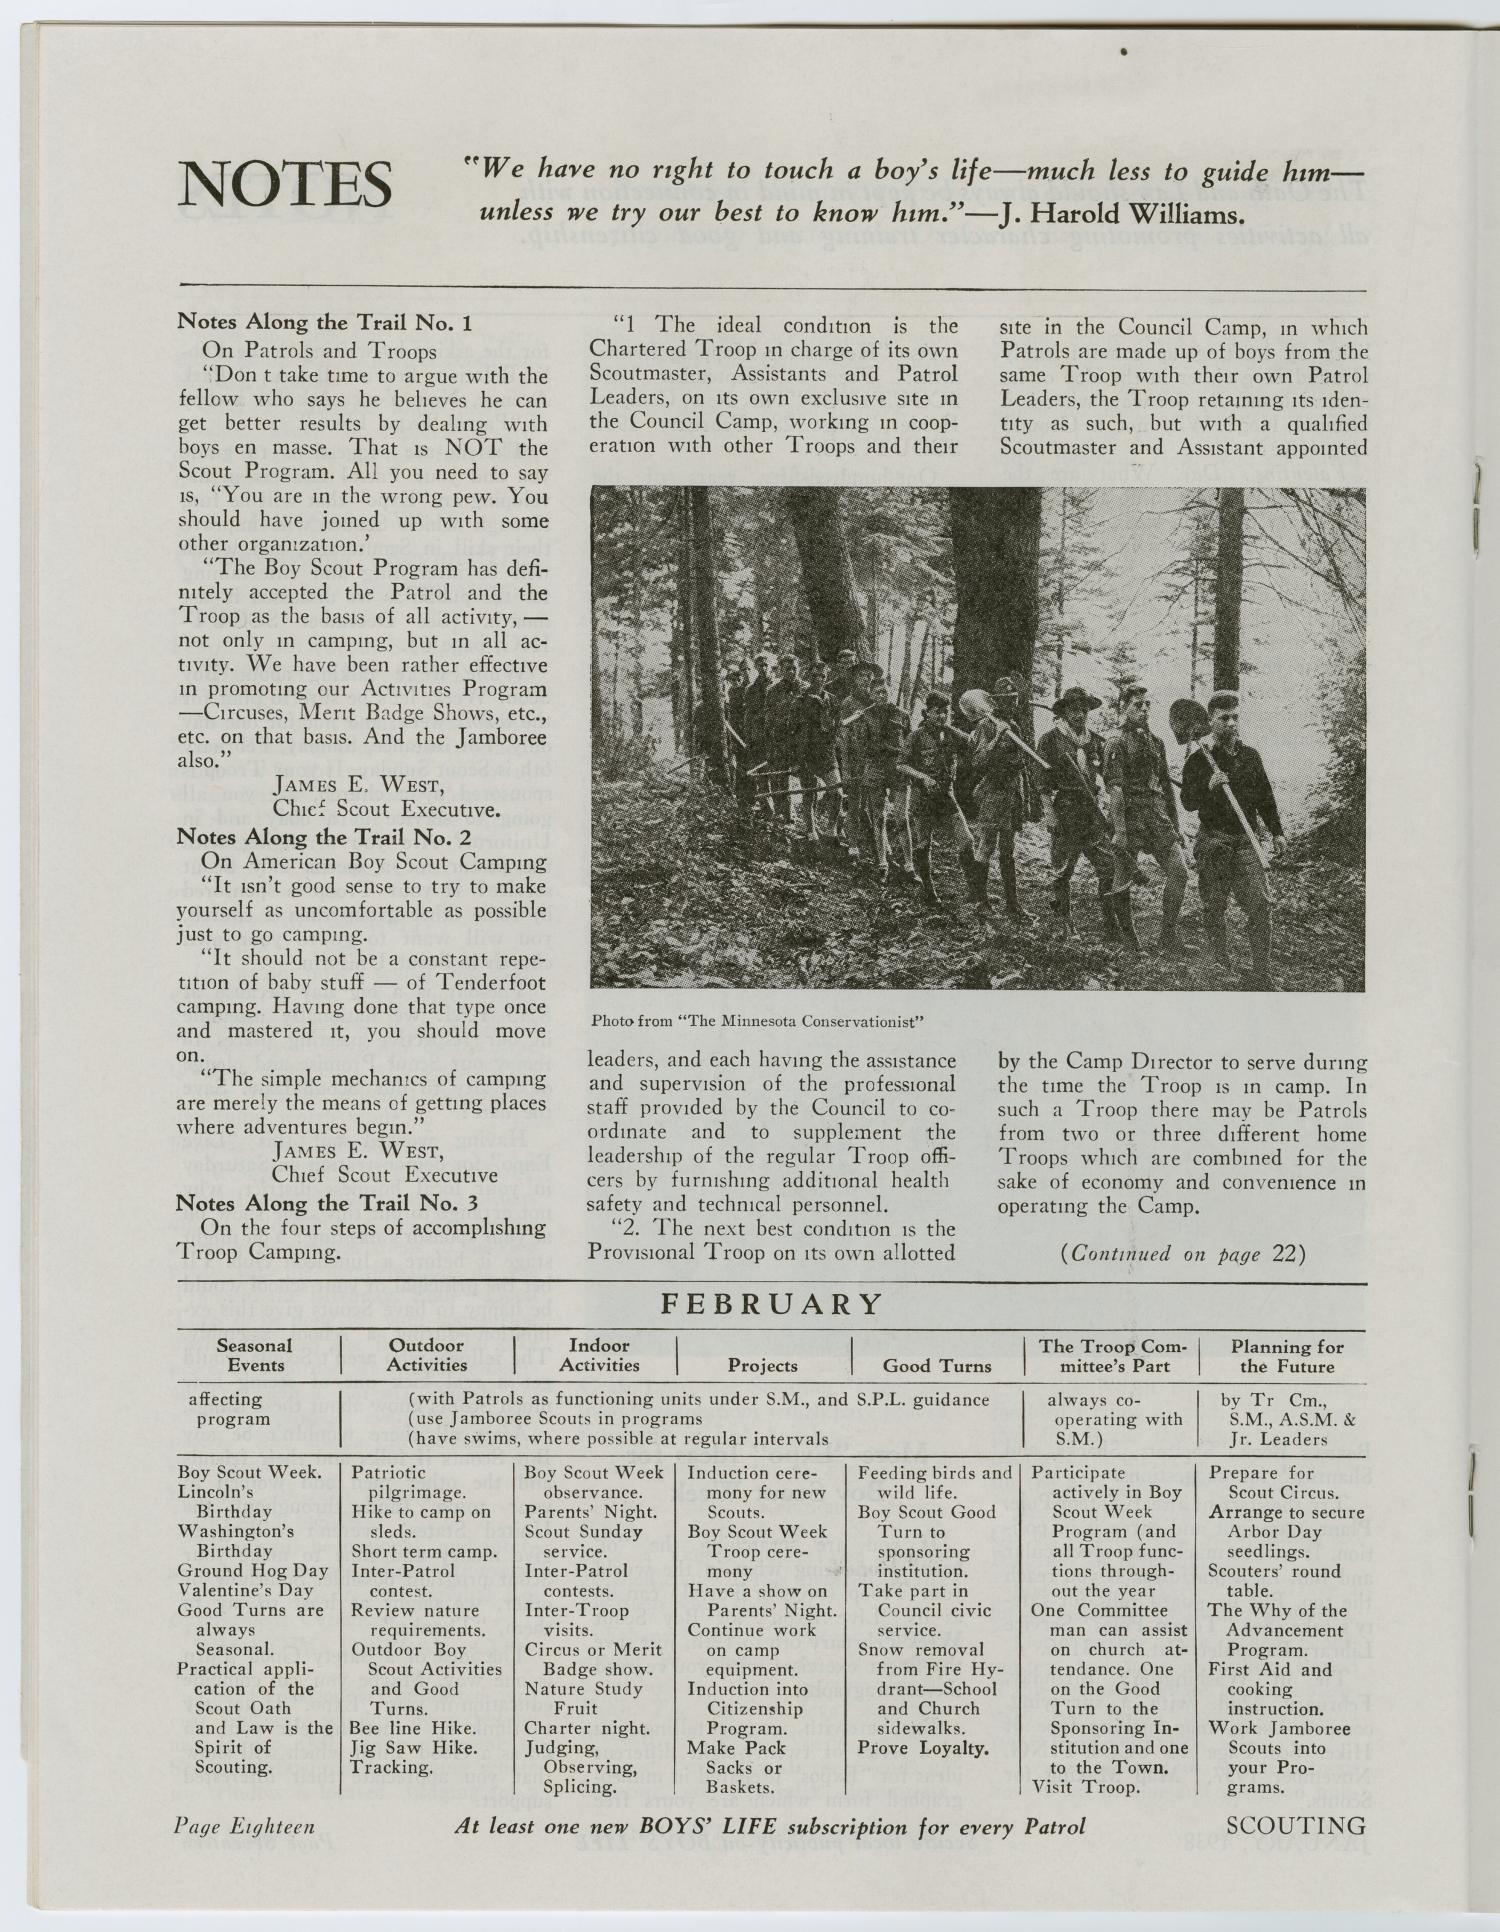 Scouting, Volume 26, Number 1, January 1938
                                                
                                                    18
                                                